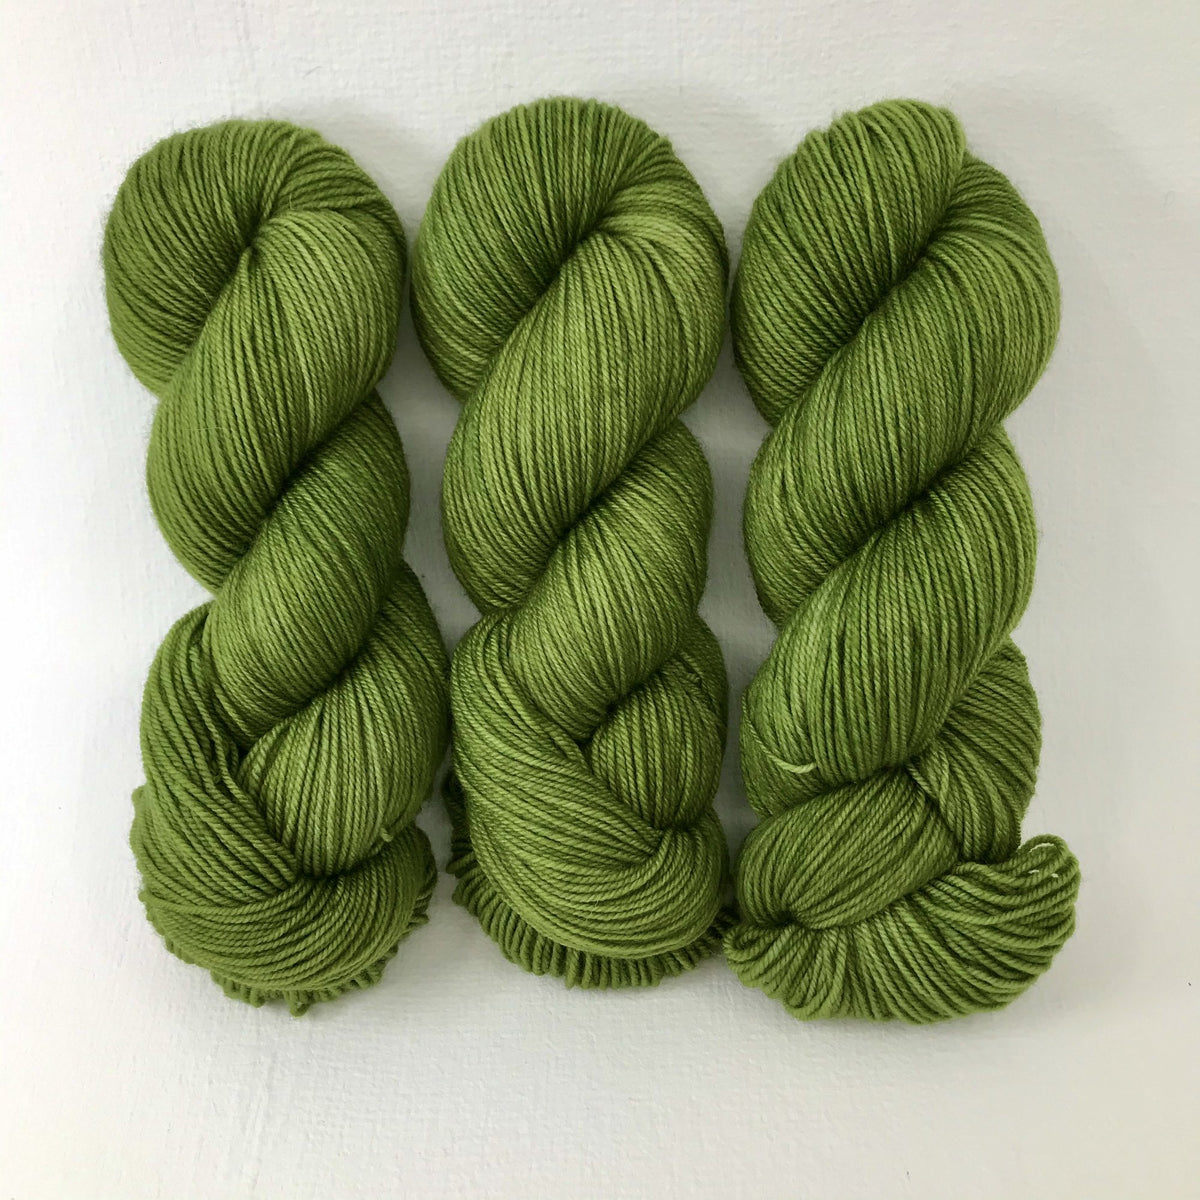 Mossy Bank - Merino DK / Light Worsted - Dyed Stock